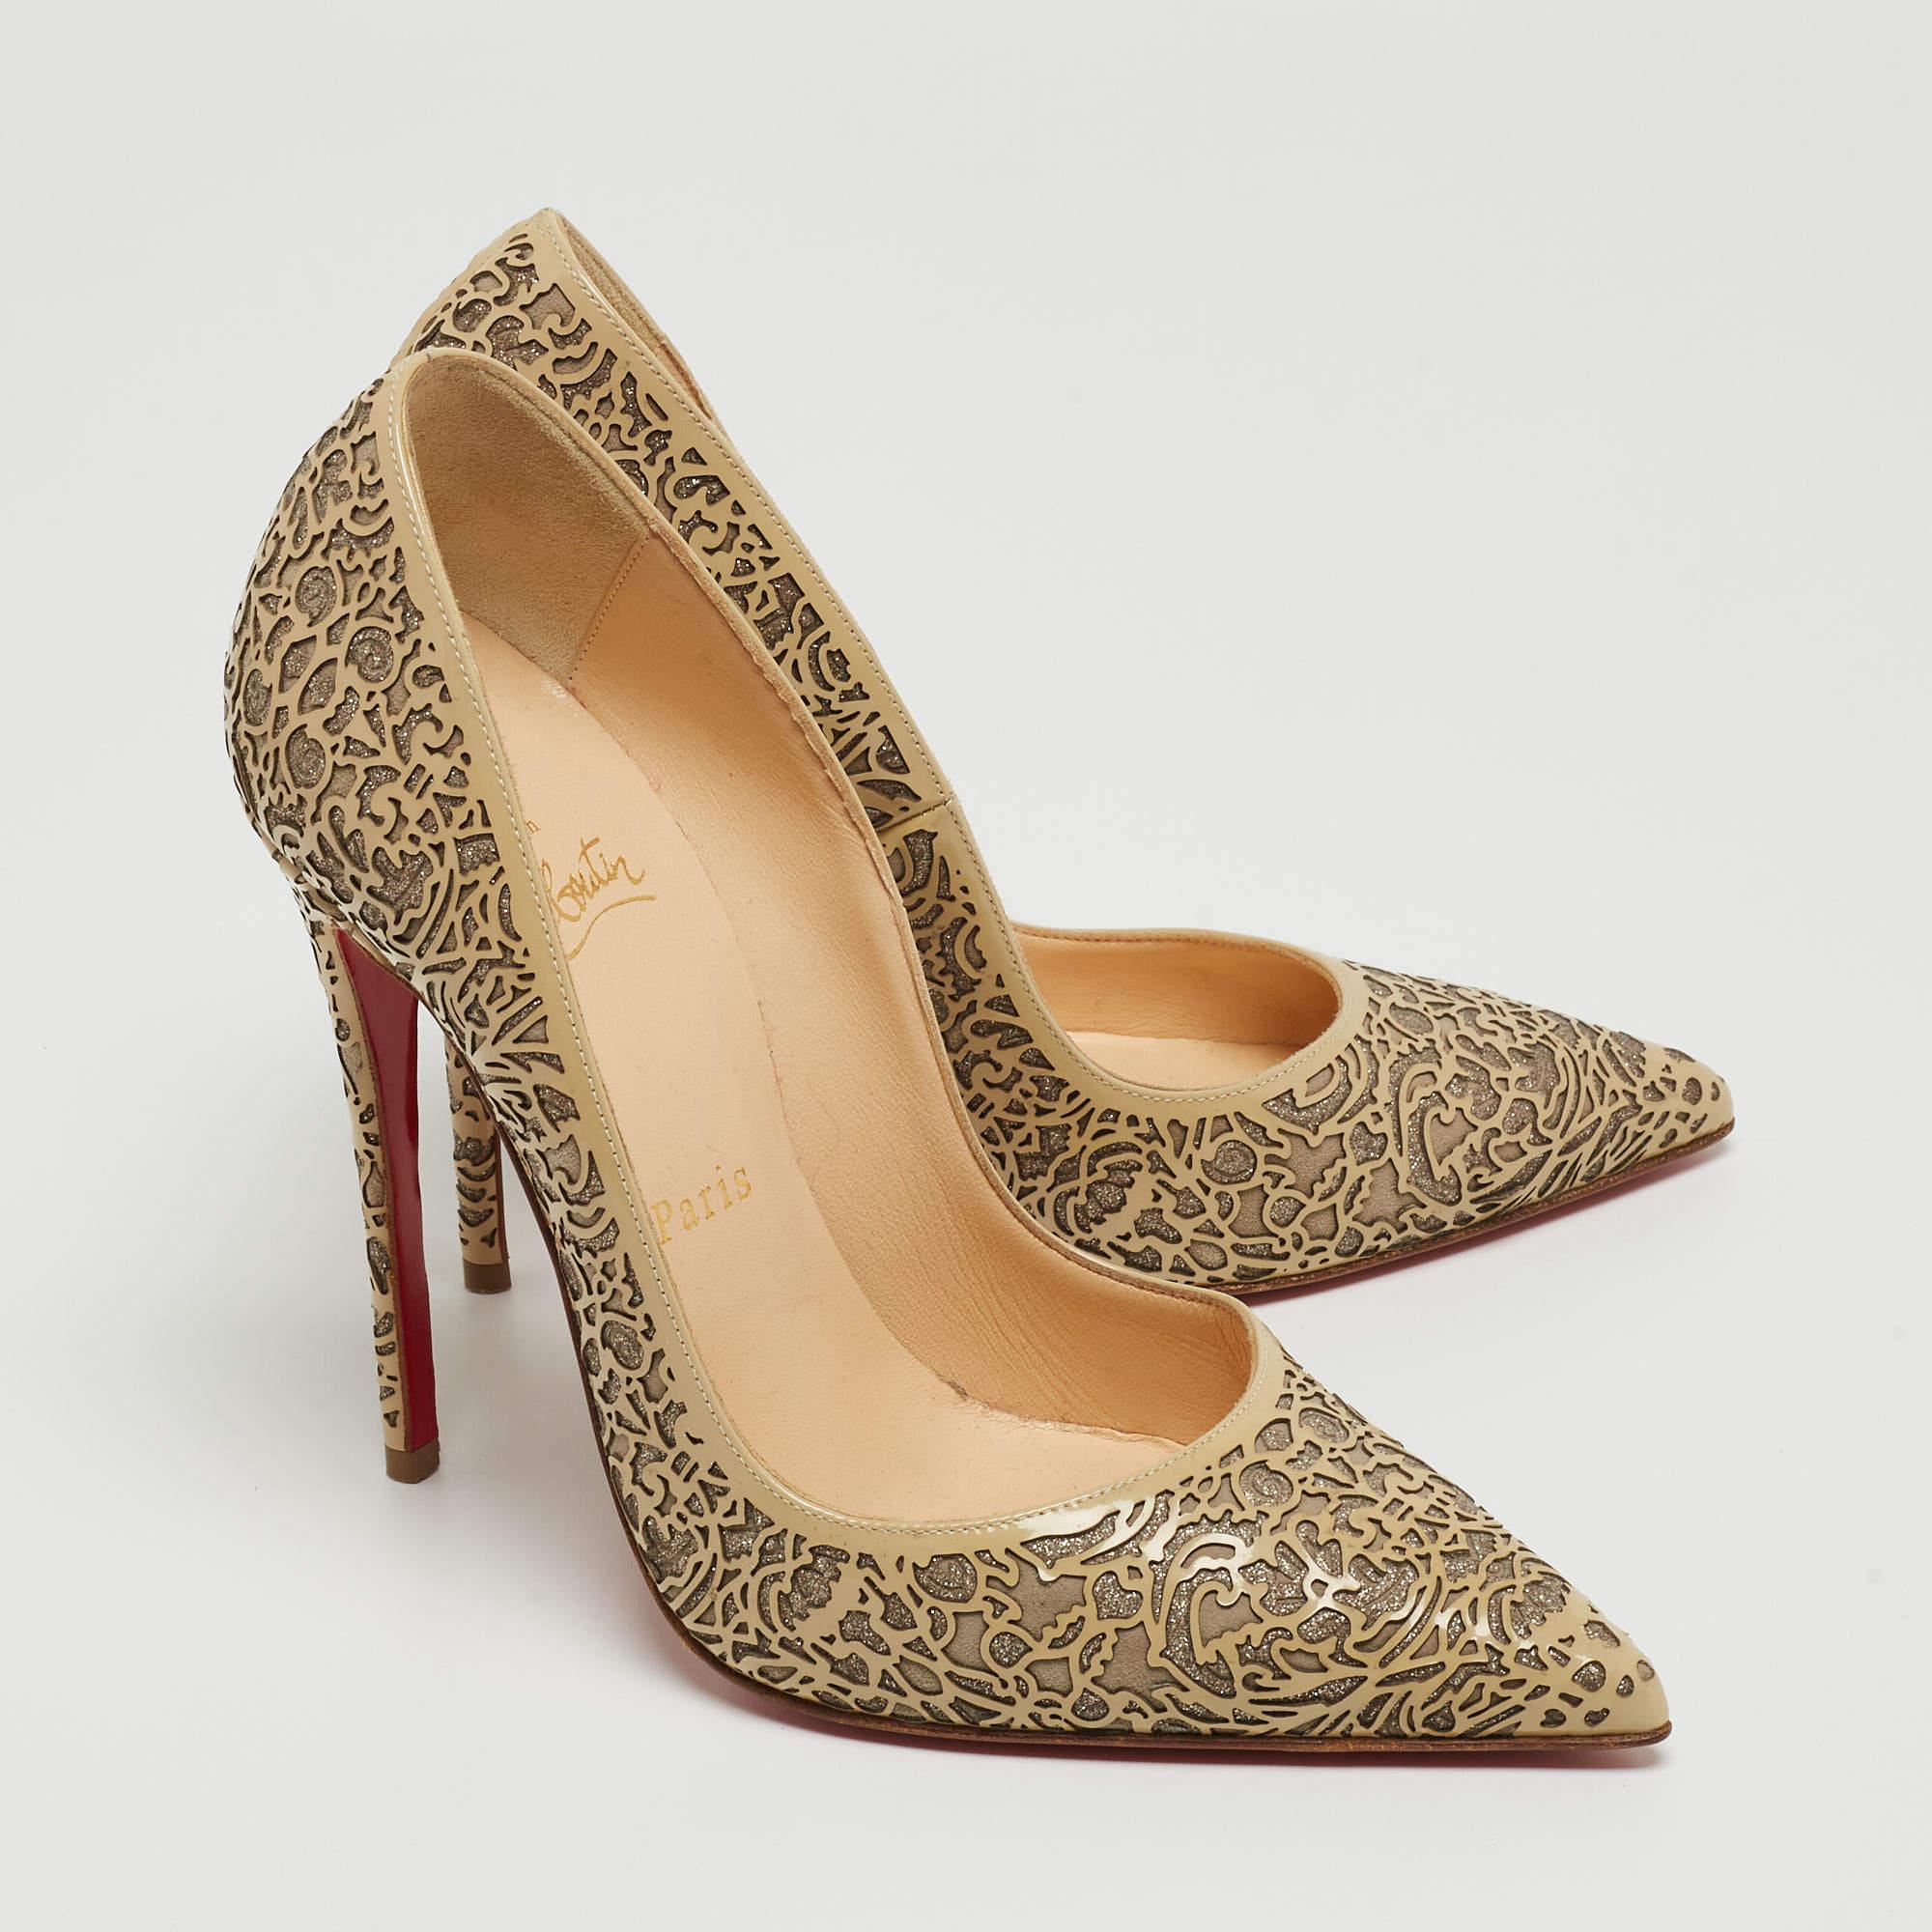 Women's Christian Louboutin Two Tone Laser Cut Patent Leather So Kate Pumps Size 37 For Sale